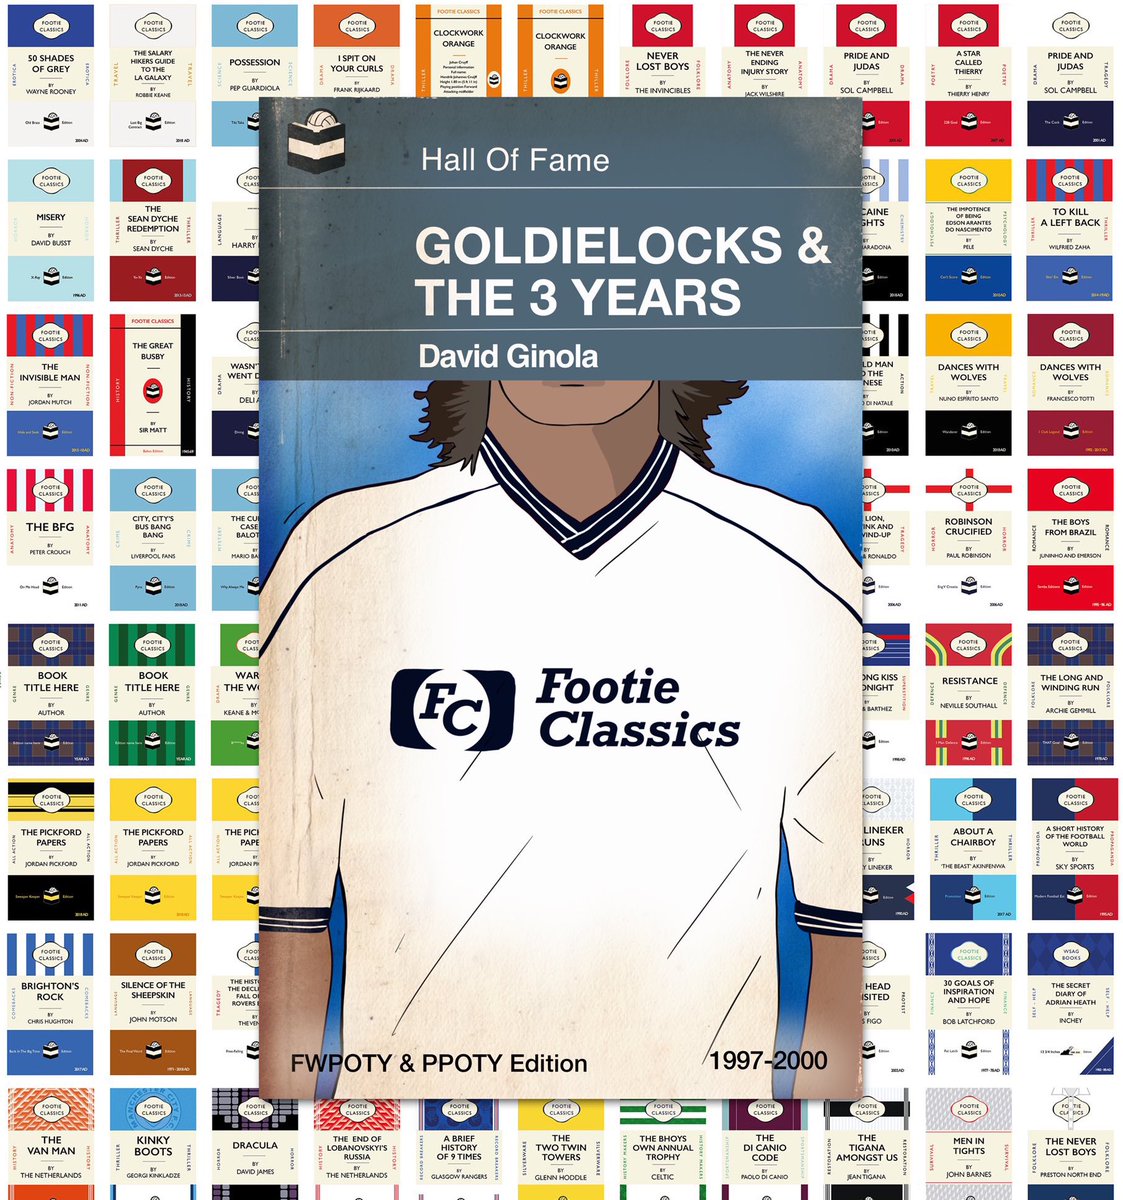 GOLDIELOCKS AND THE 3 YEARS
By David Ginola
Hall Of Fame
FWPOTY & PPOTY Edition 1997-2000

A footie classic about how #Ginola won the hearts of the #Spurs faithful and was inducted into the Spurs Hall of Fame after just 3 seasons. #COYS https://t.co/splYjUTDwz https://t.co/U79e9idZae